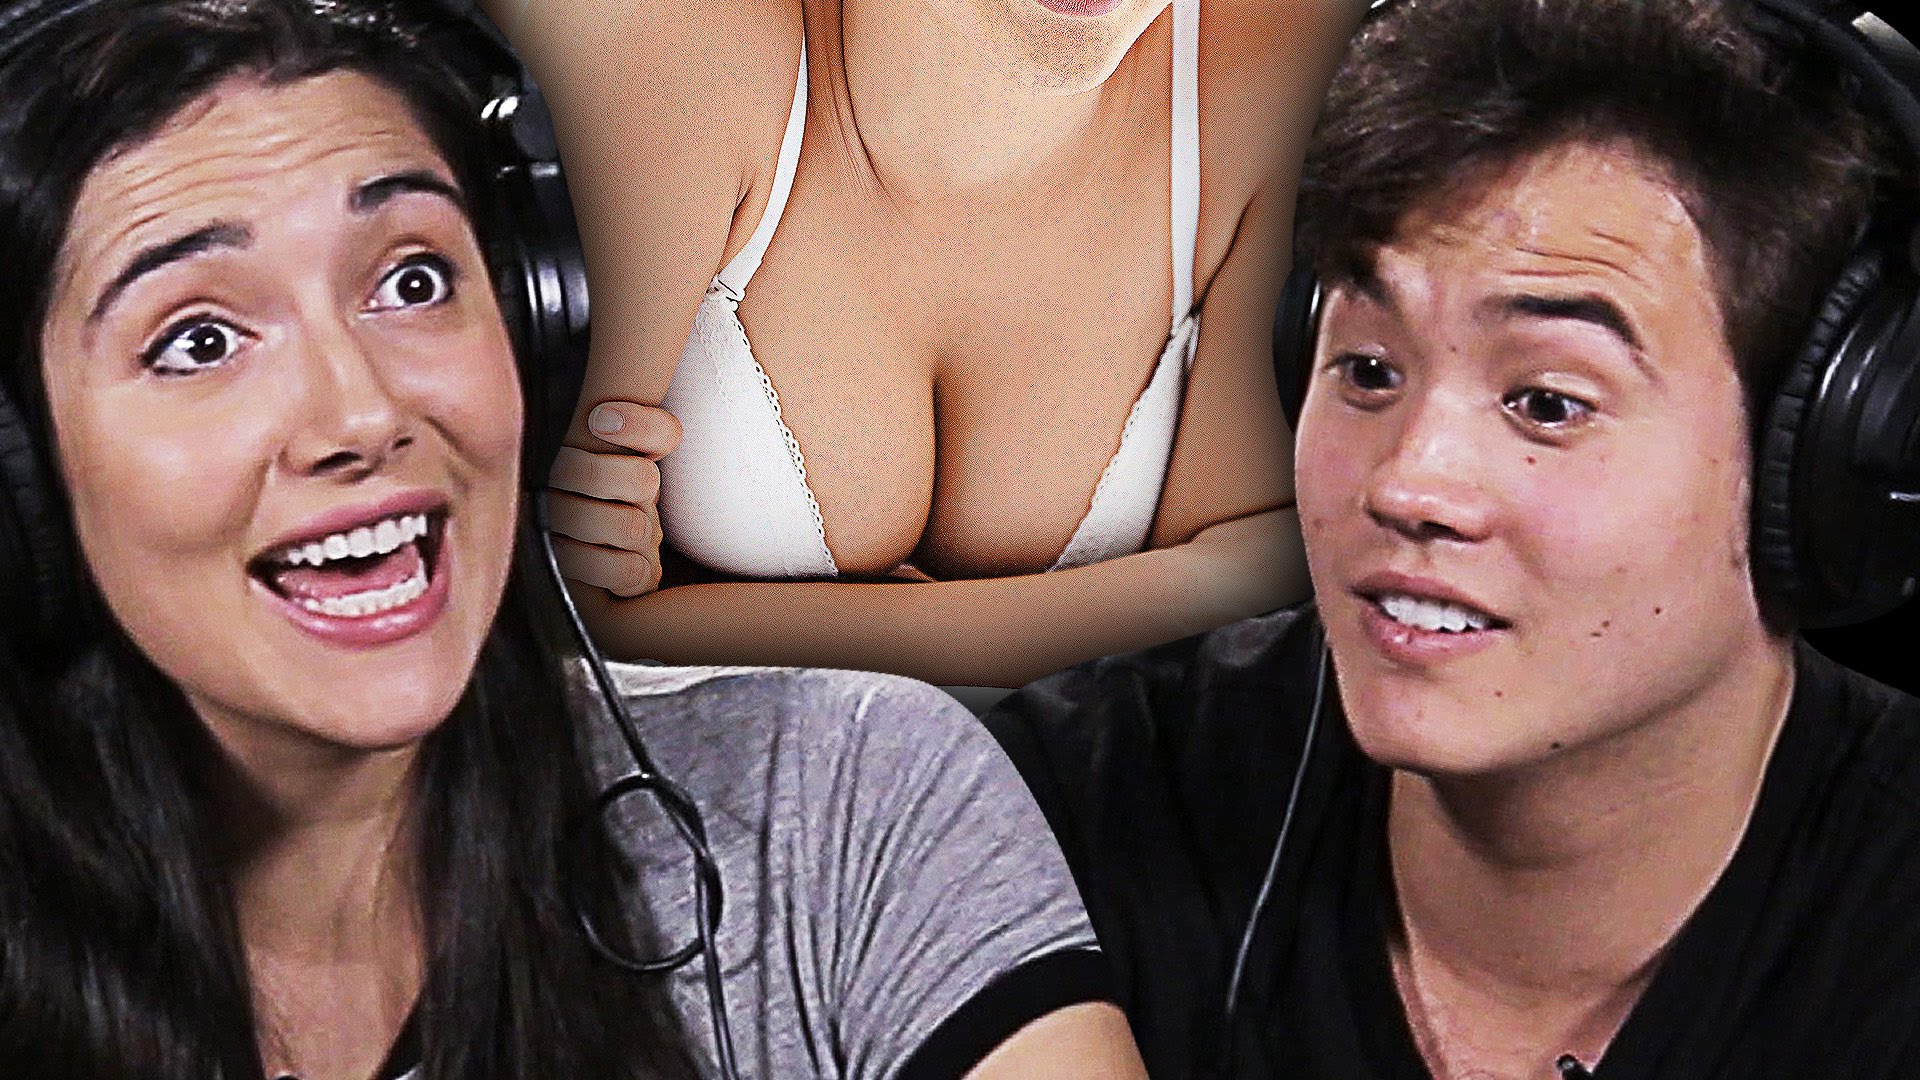 1920px x 1080px - BuzzFeed Video - Couples Watch Hardcore Porn Together